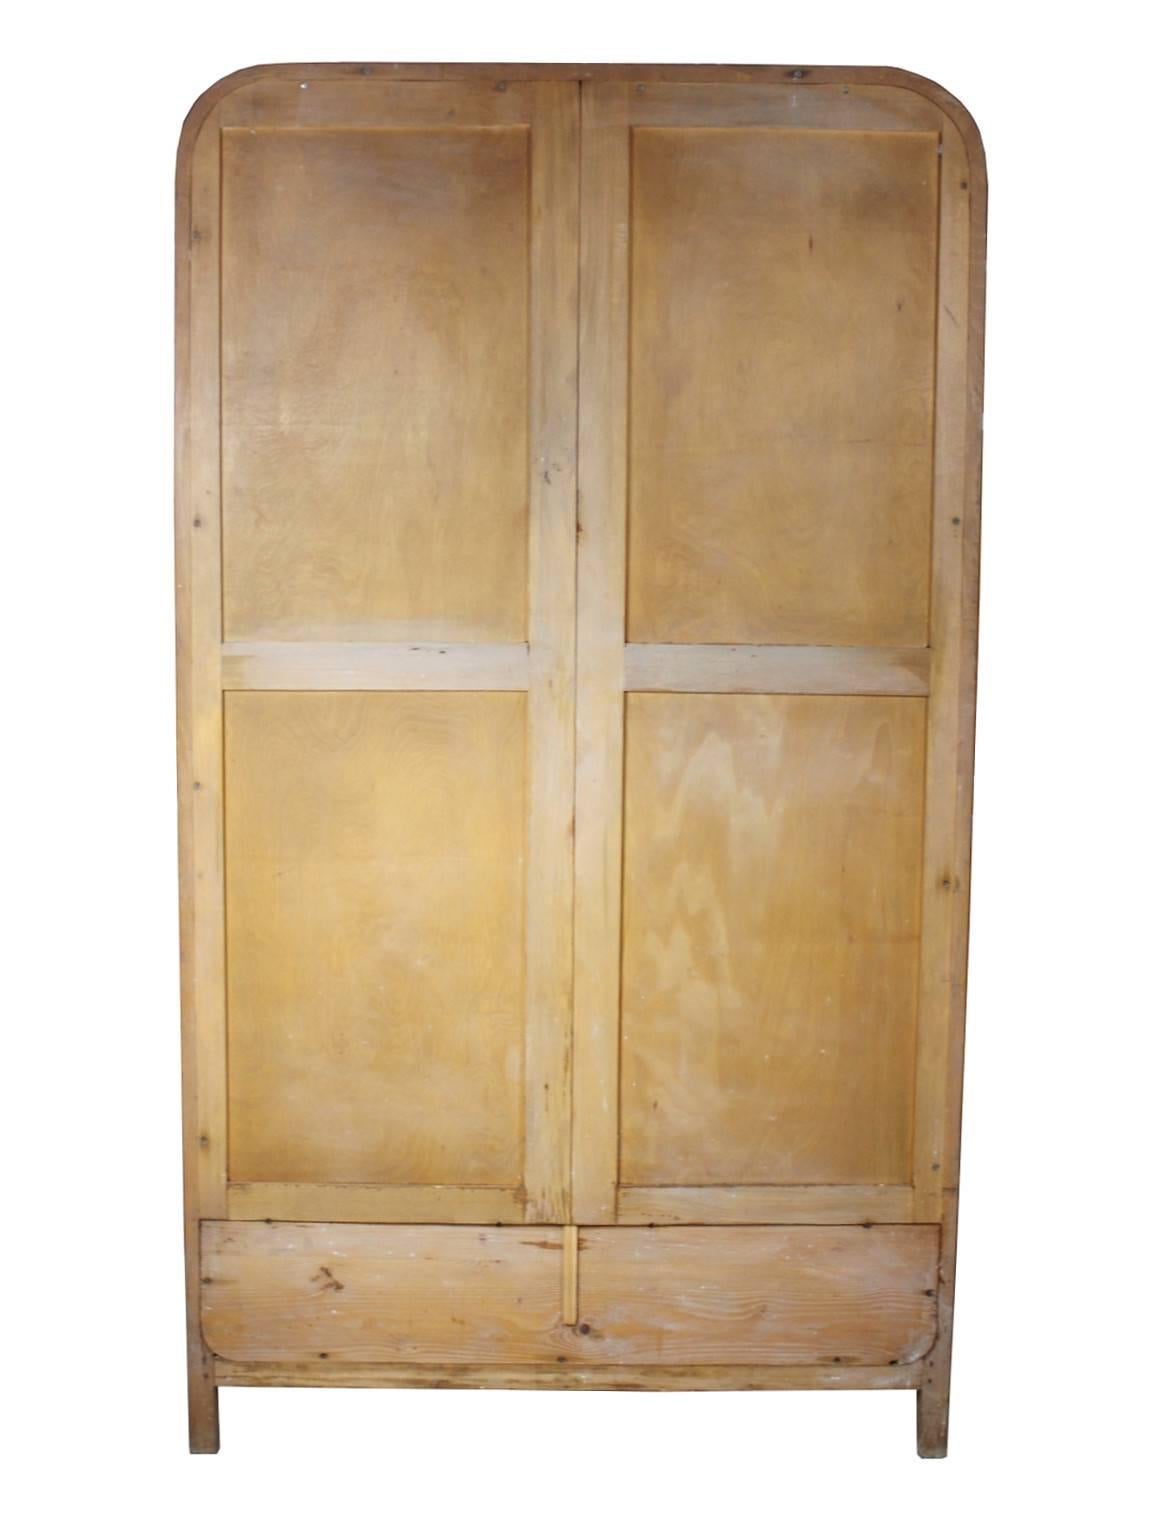 Bent Beechwood Wardrobe from Thonet, 2 pieces available 5